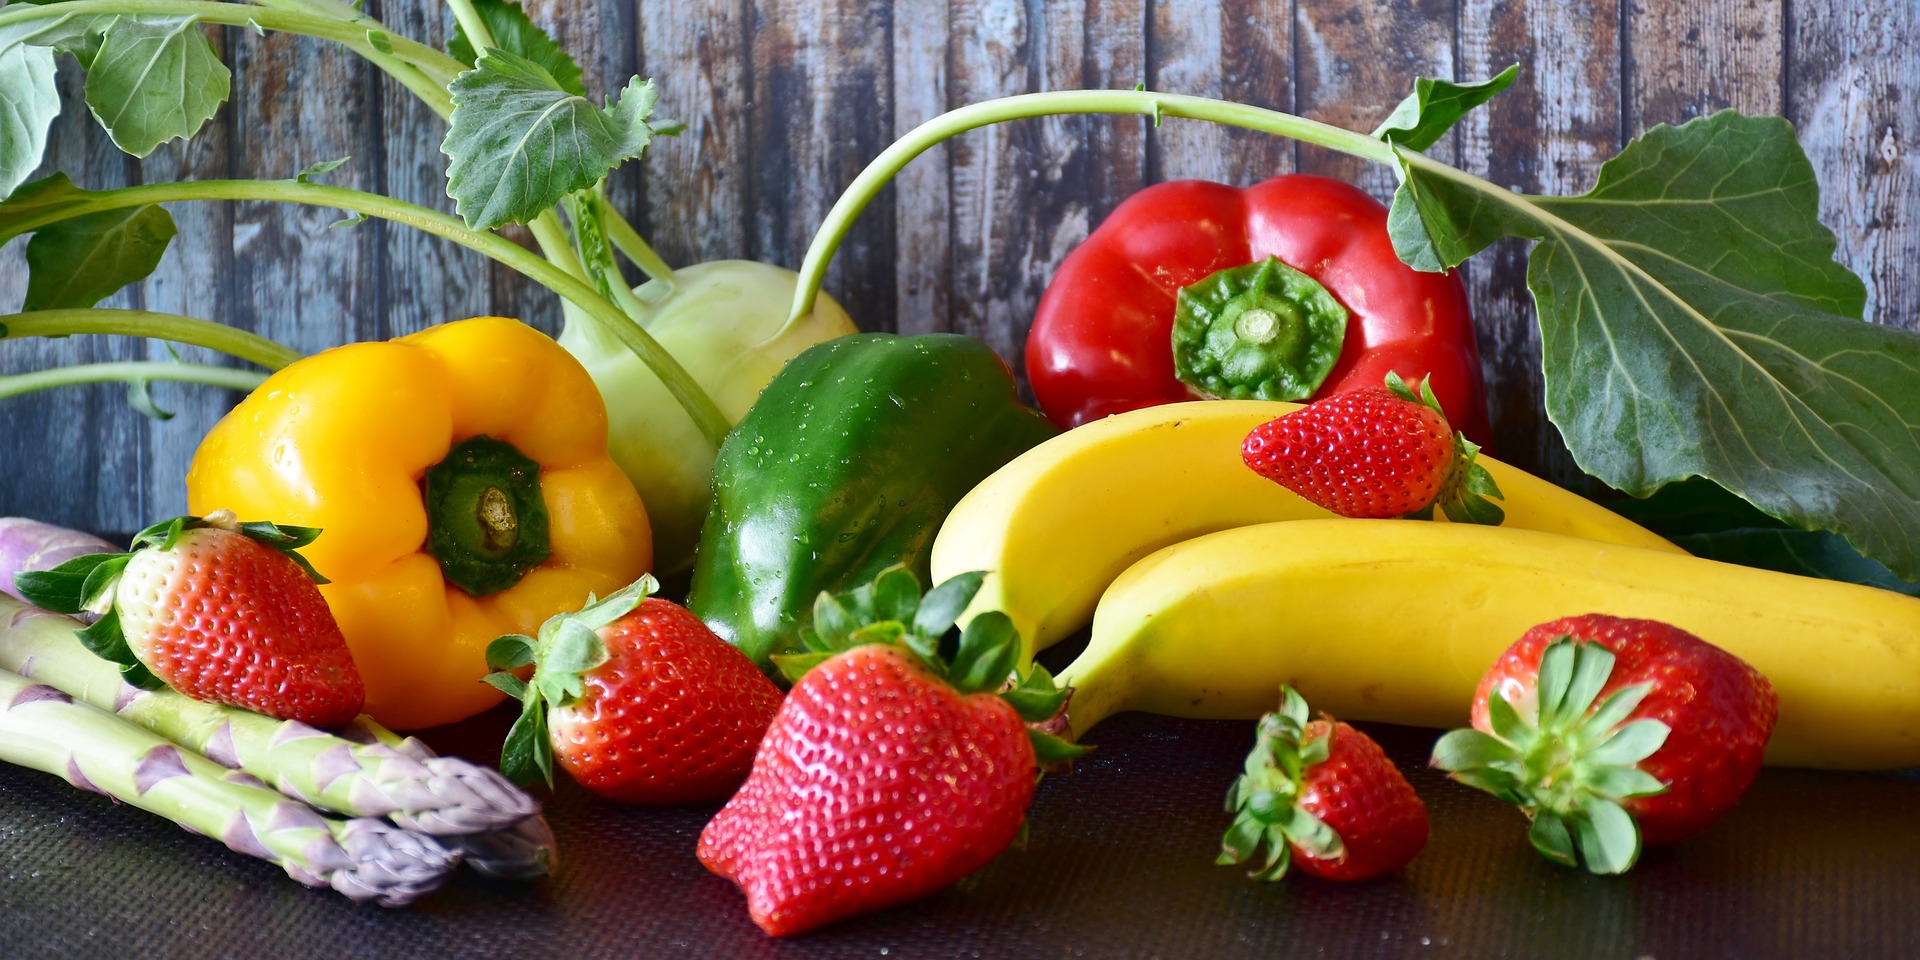 Collection of fruit and vegetables including strawberries, asparagus, bananas and peppers.